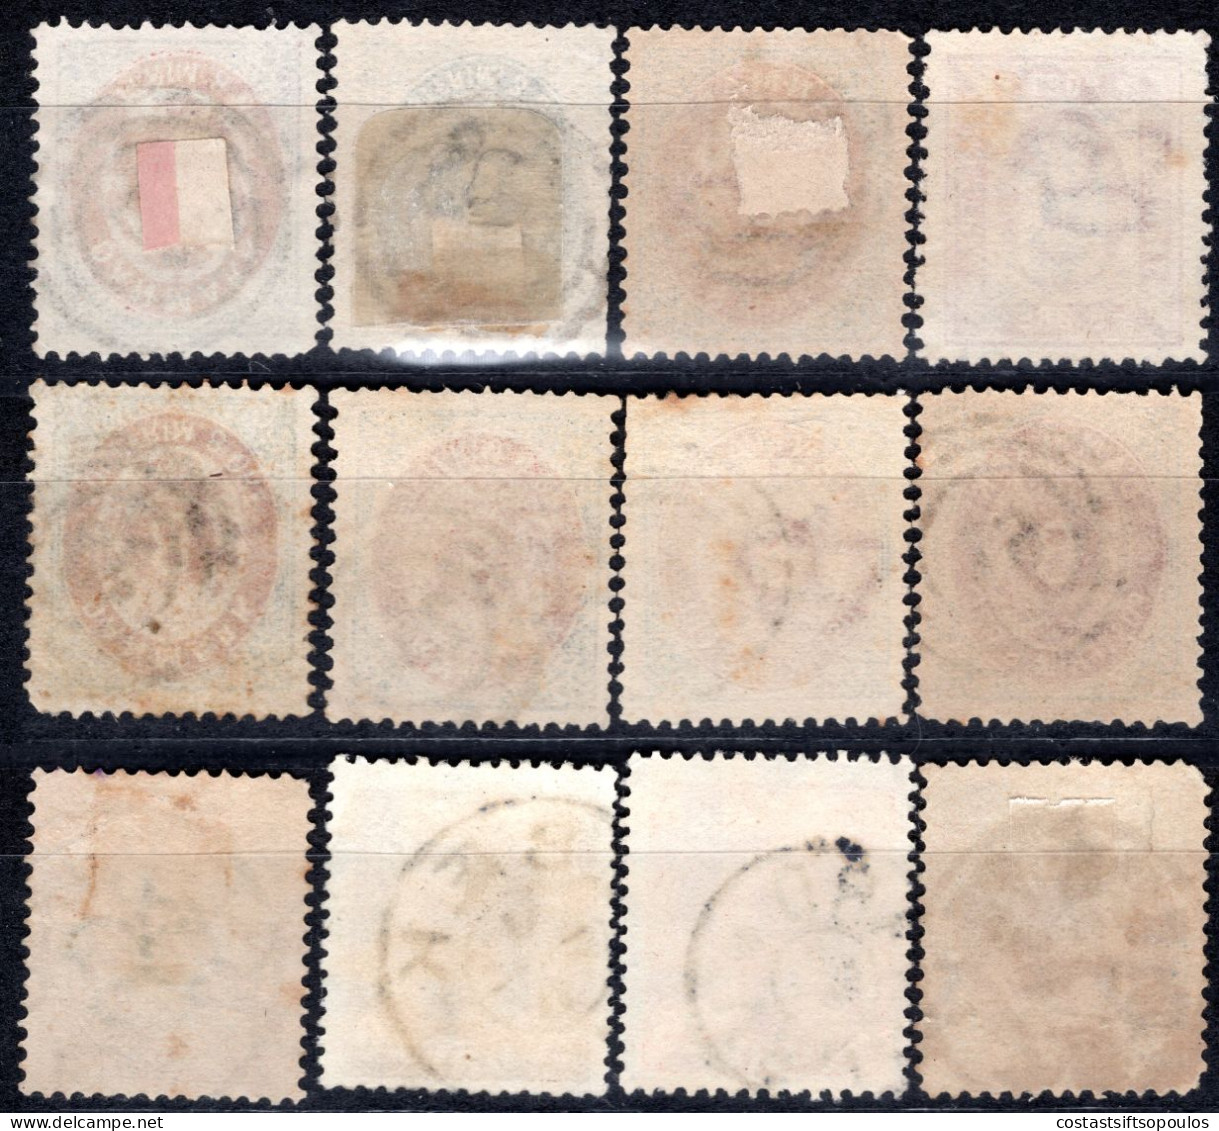 1895. DENMARK 21 CLASSIC ST. LOT WITH NICE POSTMARKS,SOME WITH FAULTS, 5 SCANS - Verzamelingen